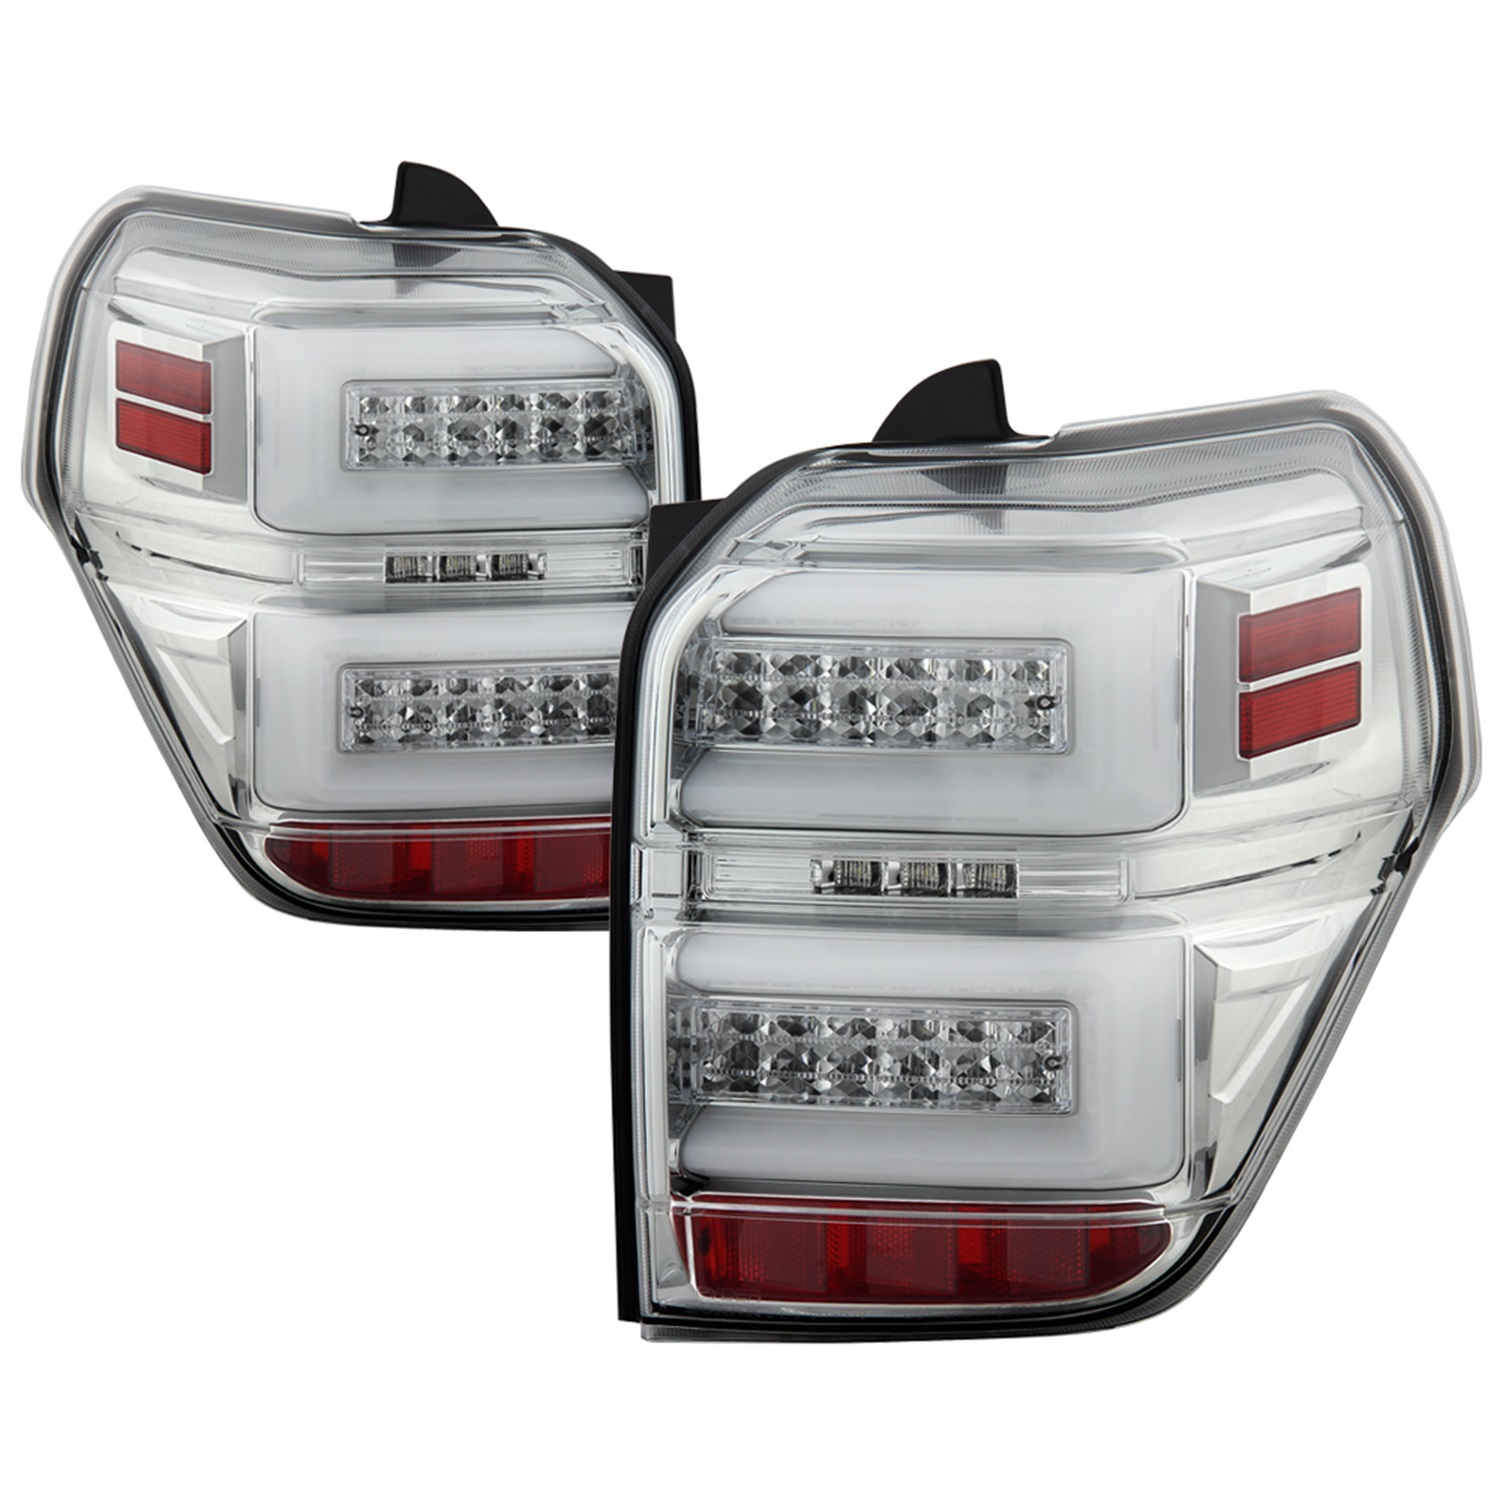 Spyder Auto 5087805 LED Tail Lights Fits 10-14 4Runner